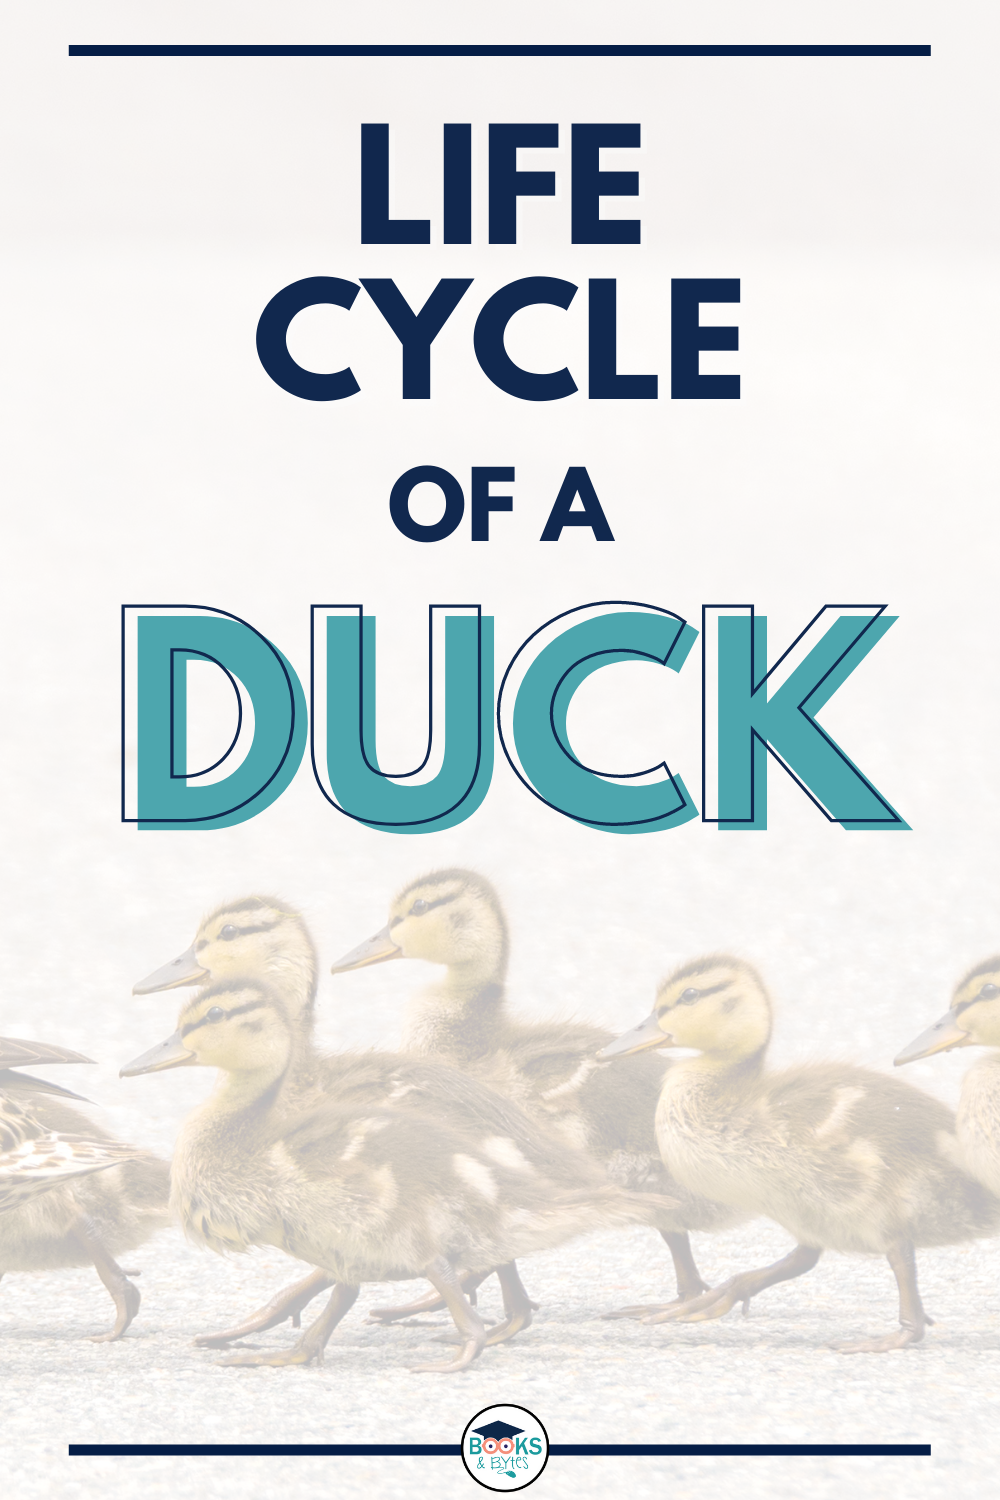 Duck Life Cycle Pack with Observation Journal by Herding Kats in  Kindergarten